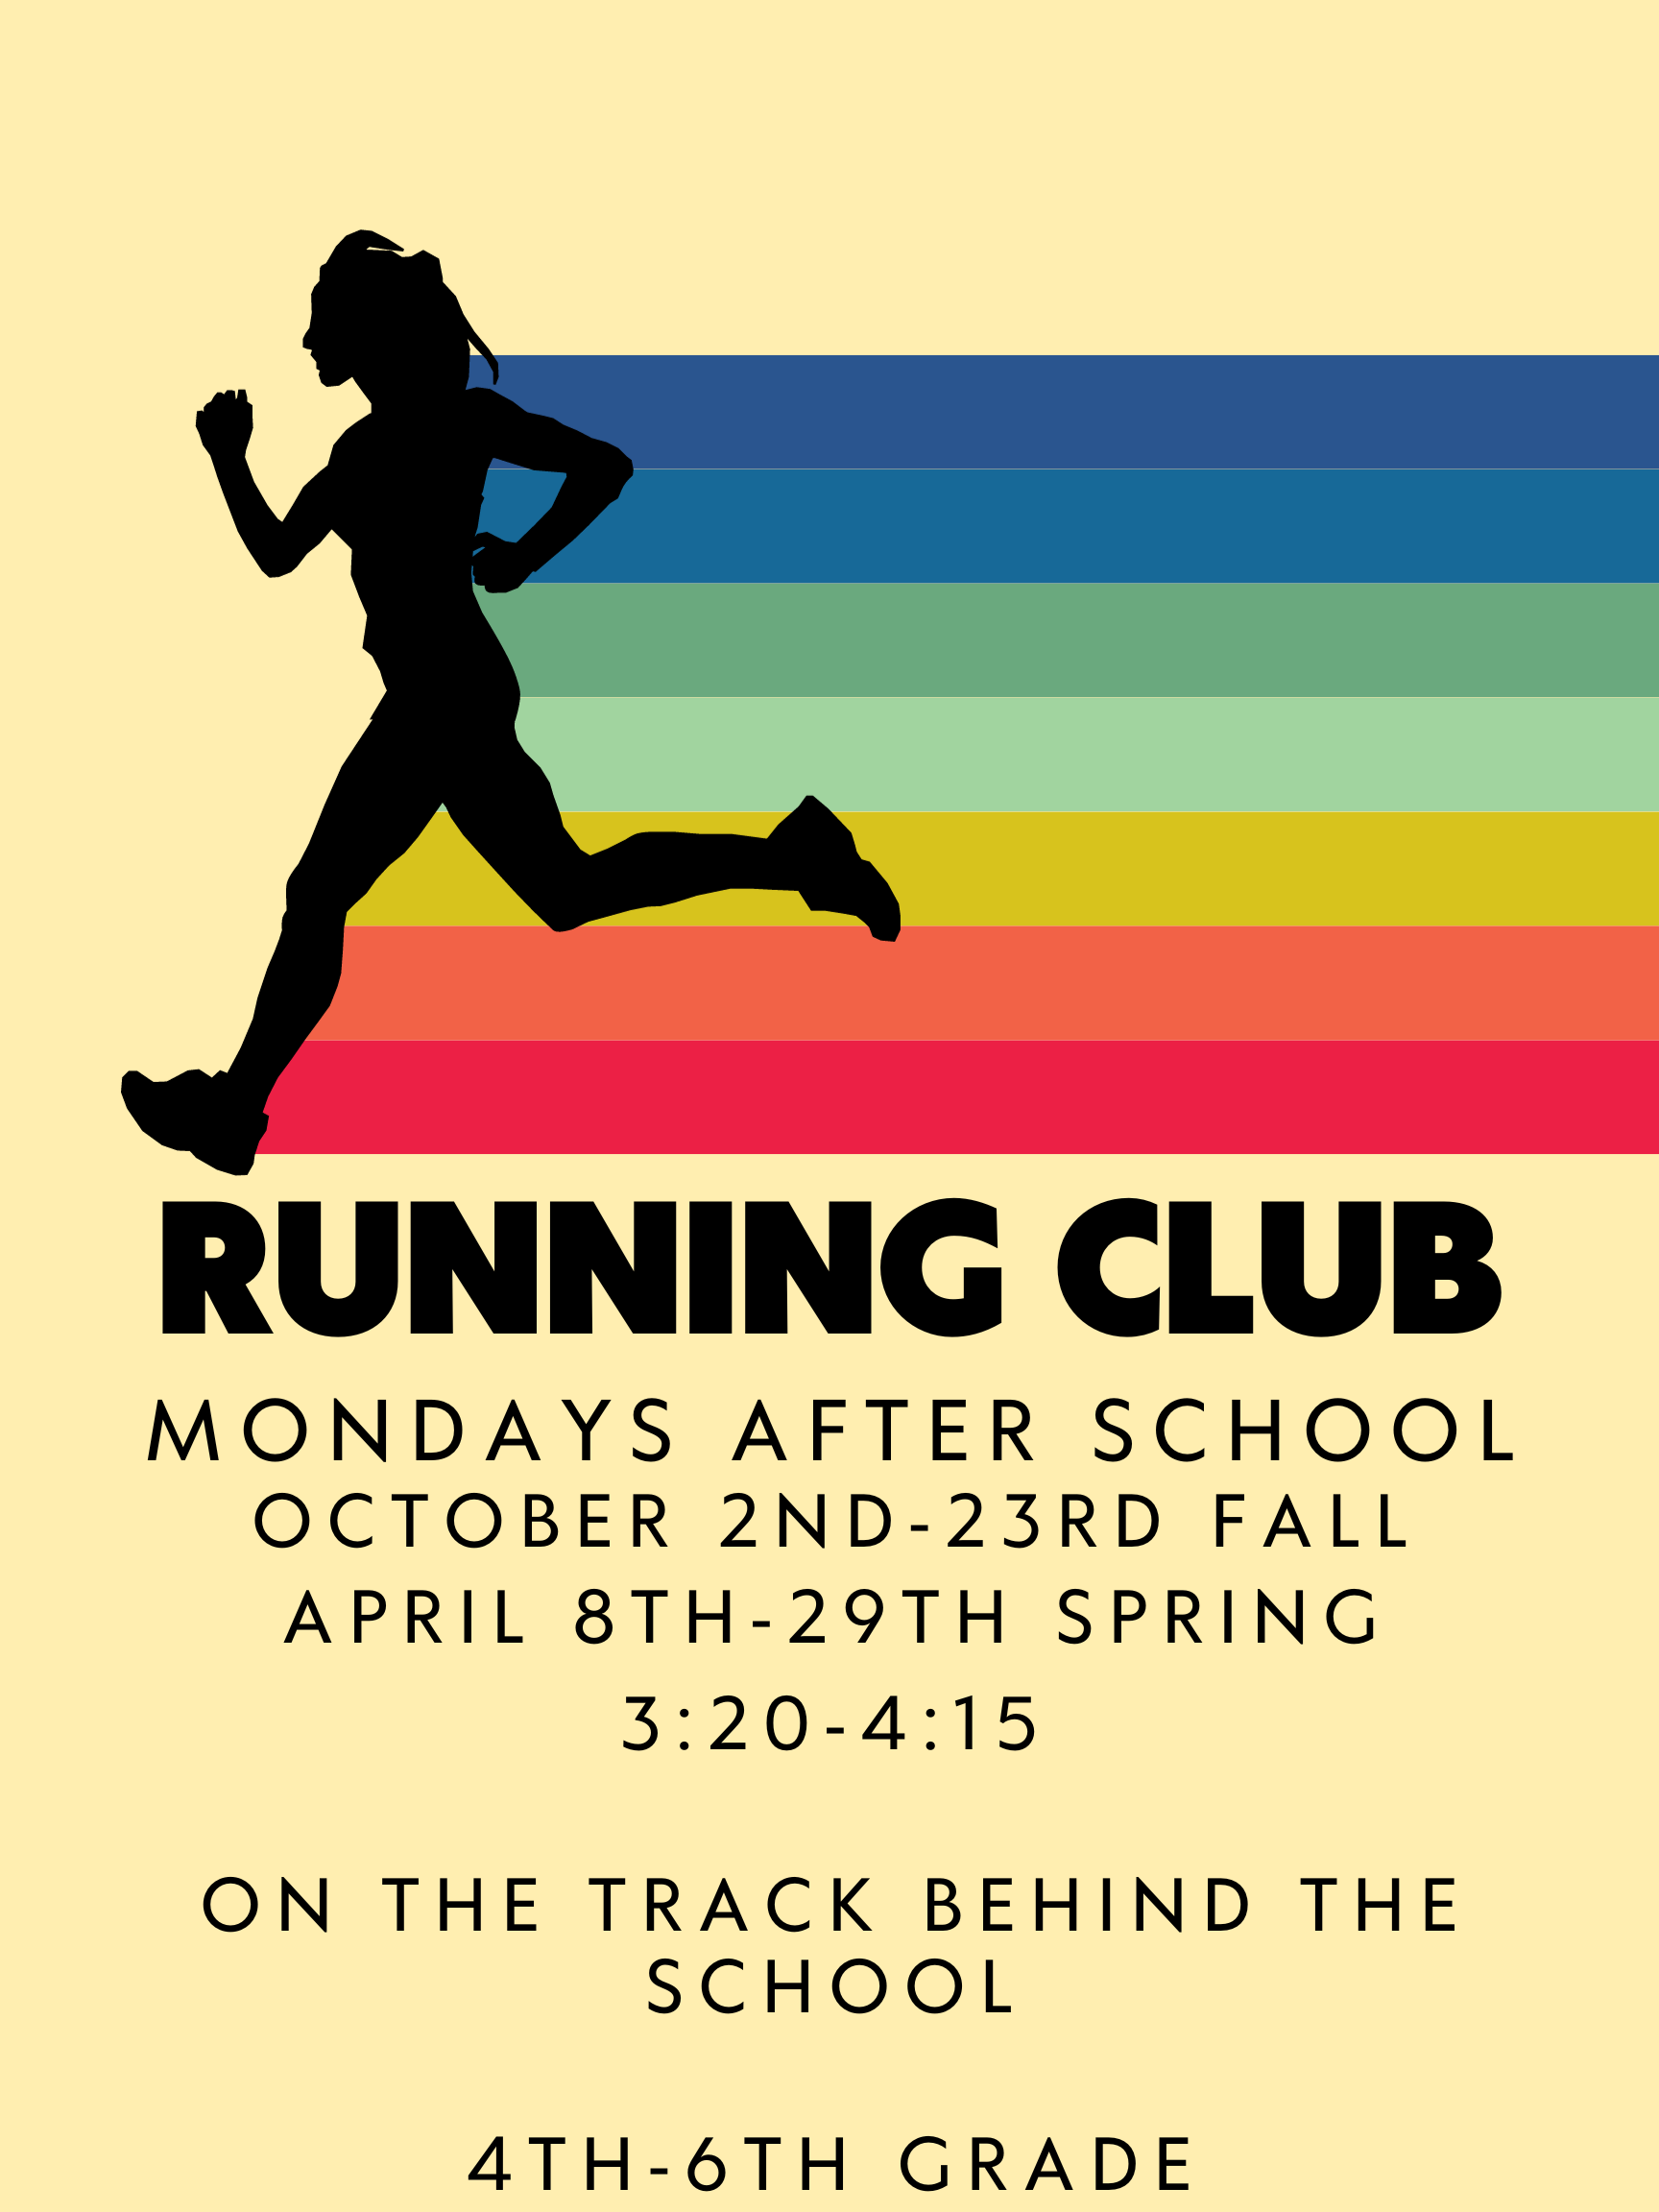 Running club, after school from 3:30 to 4:15 pm, 4-6th grades.